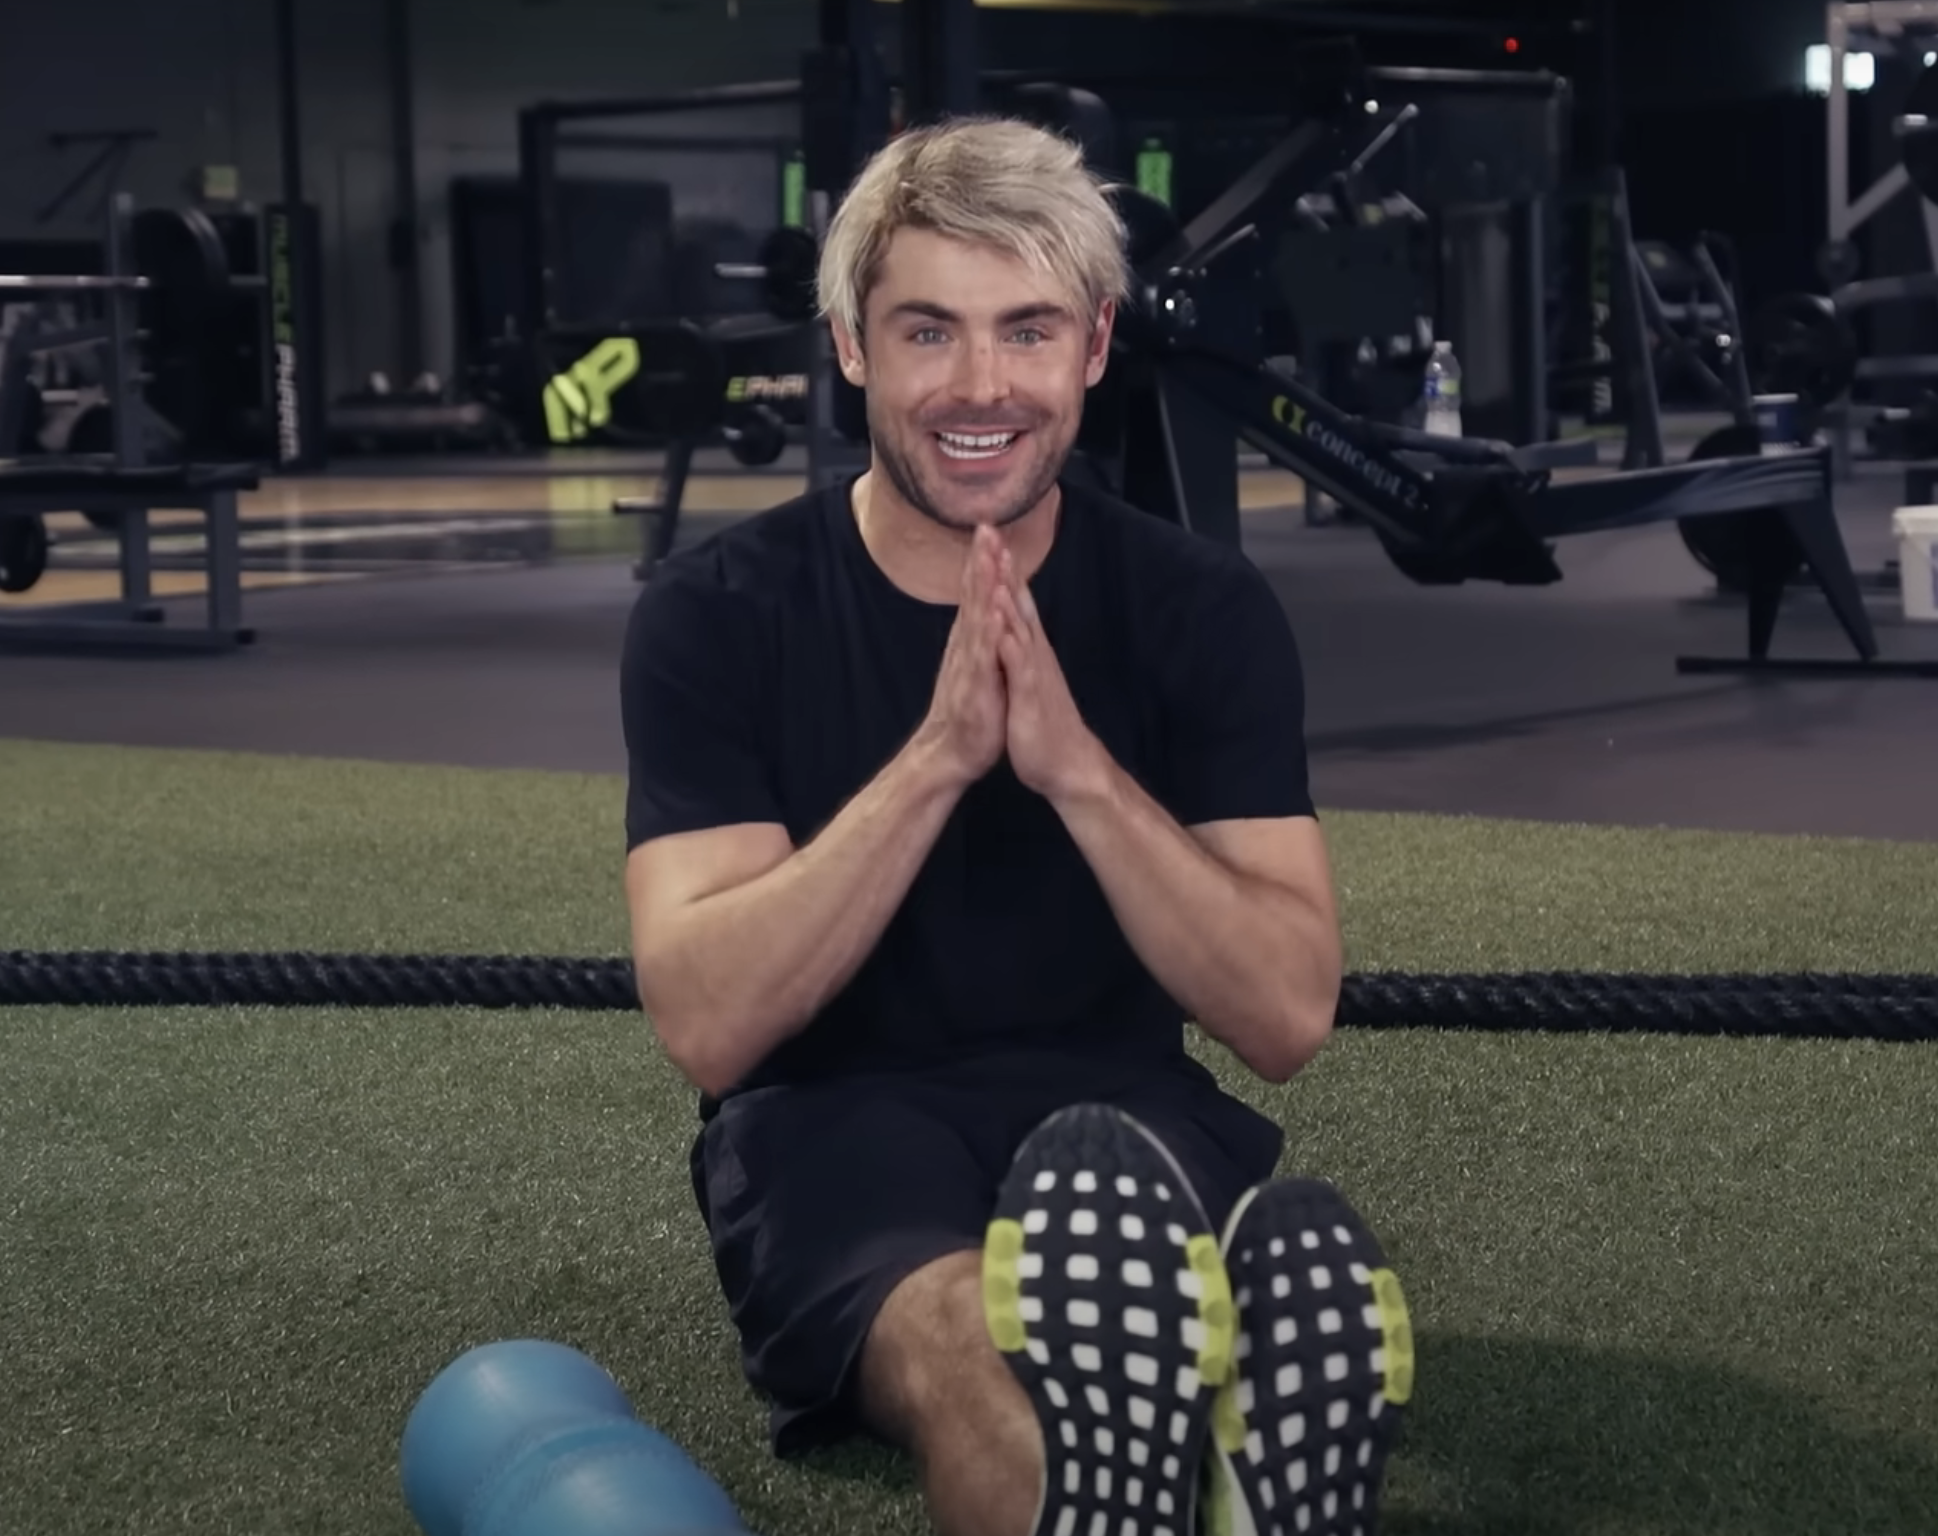 Zac smiling, sitting on gym floor with hands together, exercise equipment in background